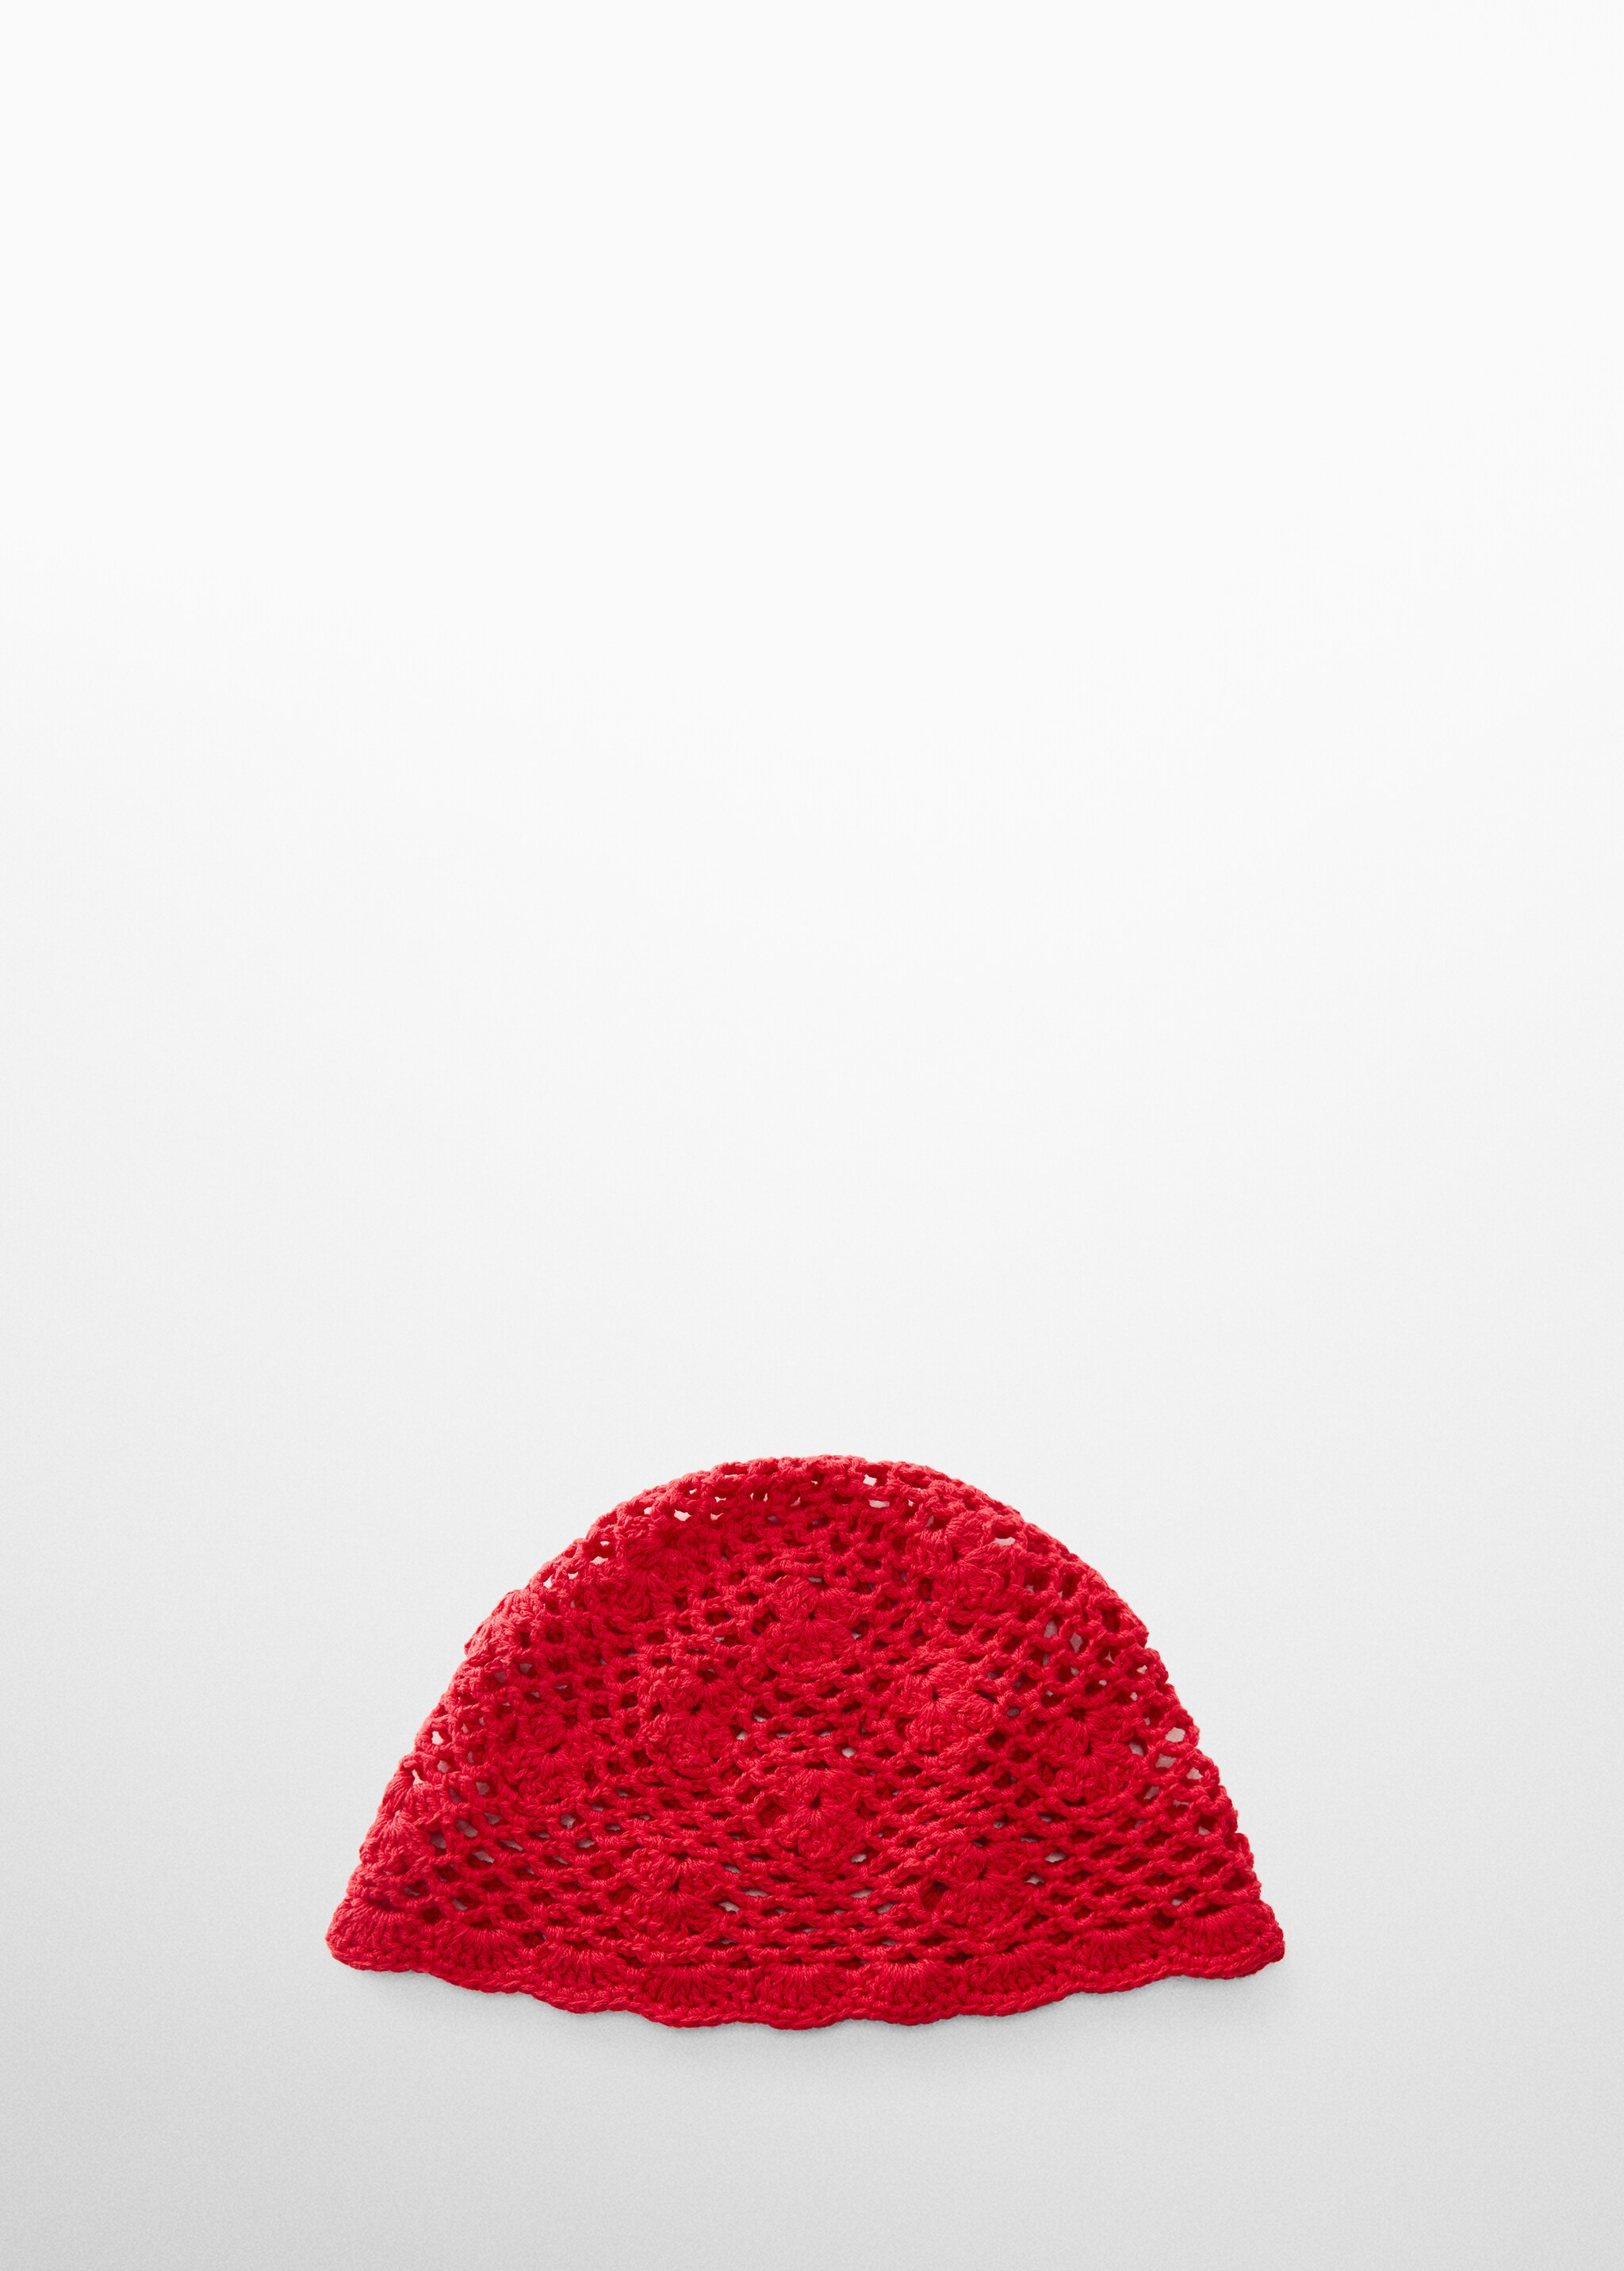 Crochet skull cap - Article without model